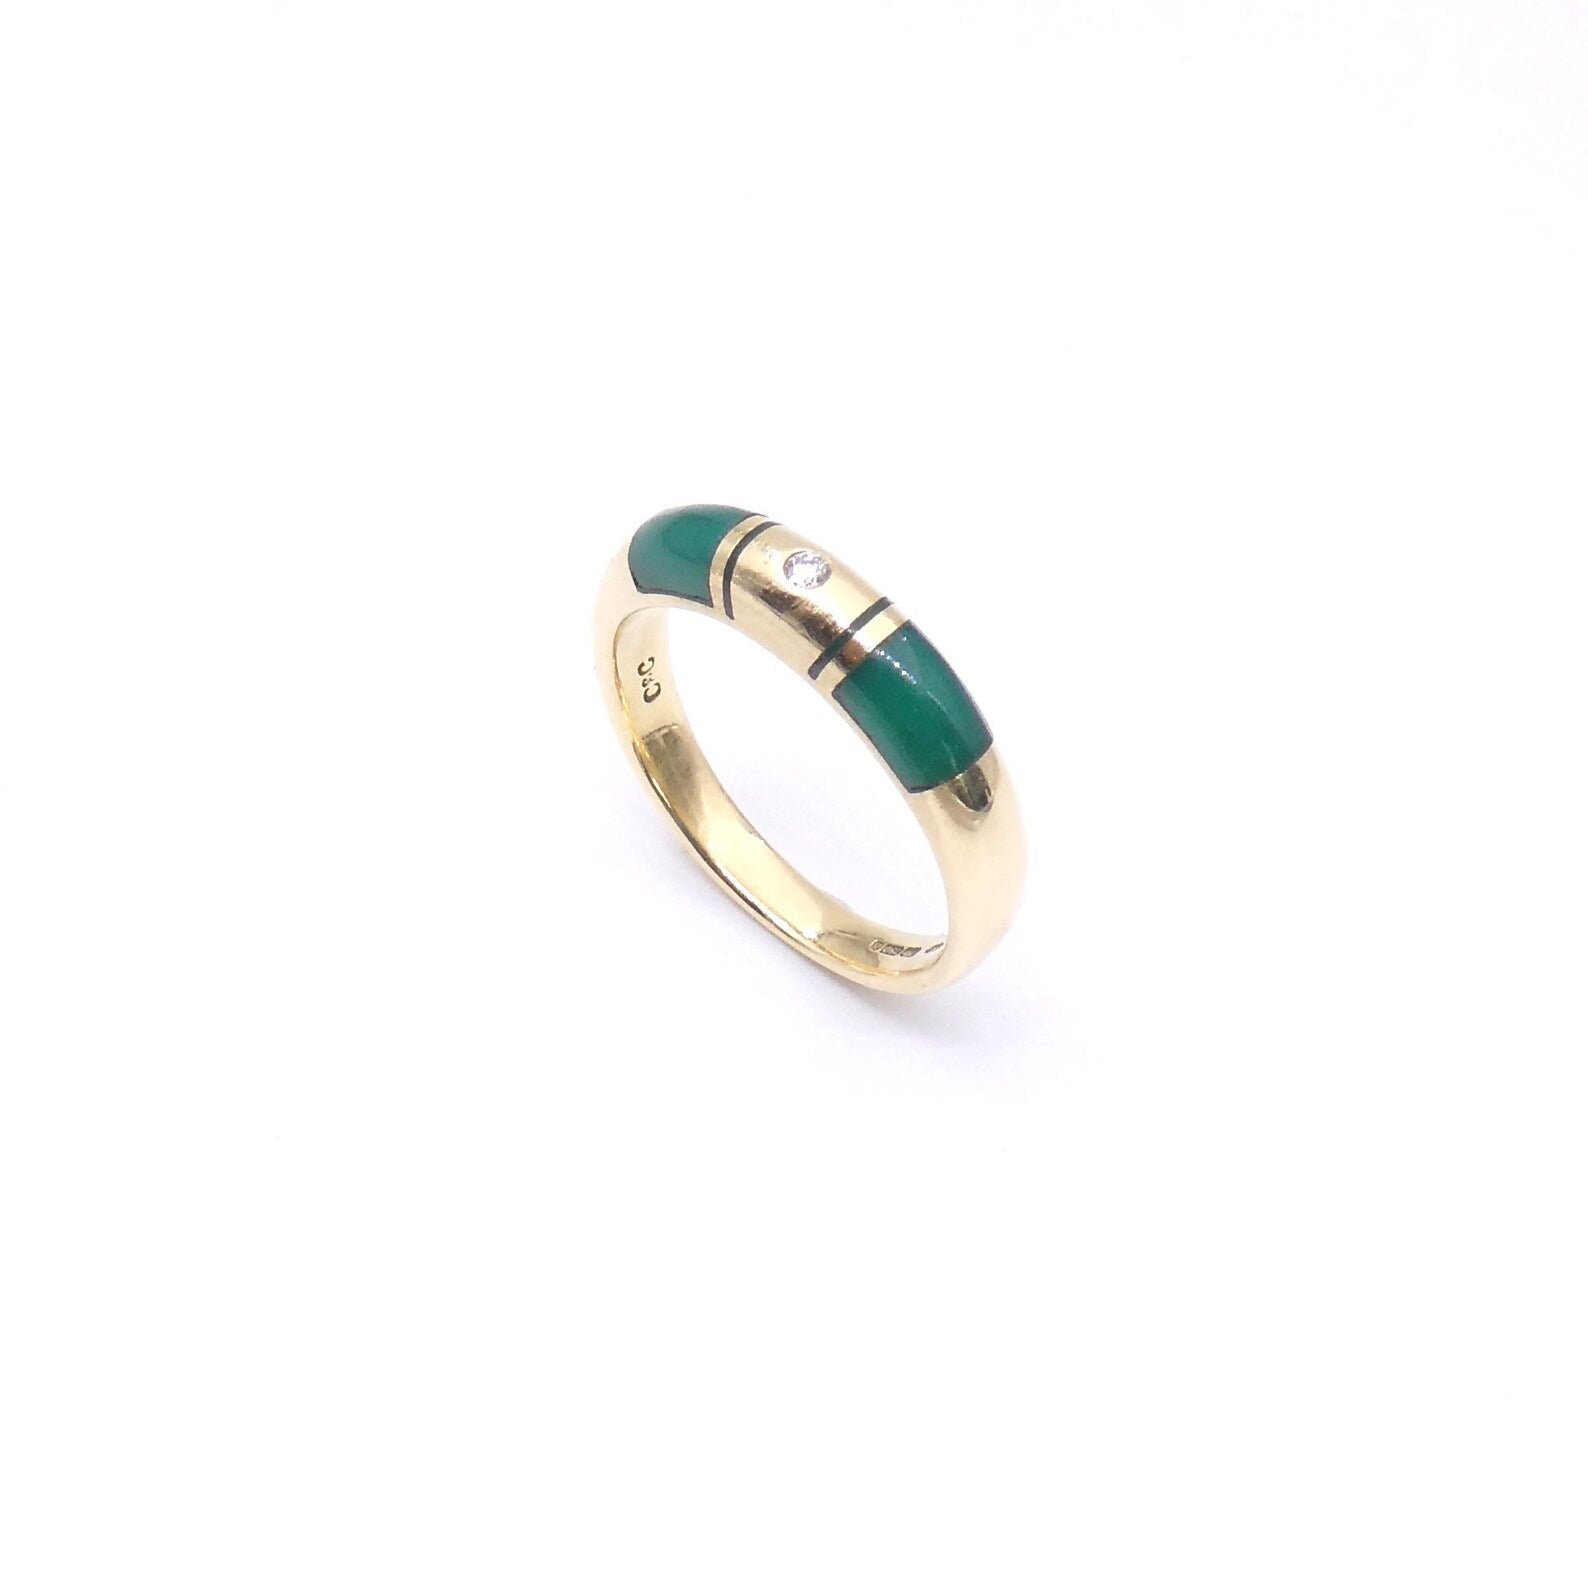 An 18kt gold band with an inlay of green aventurine set with a diamond. - Collected